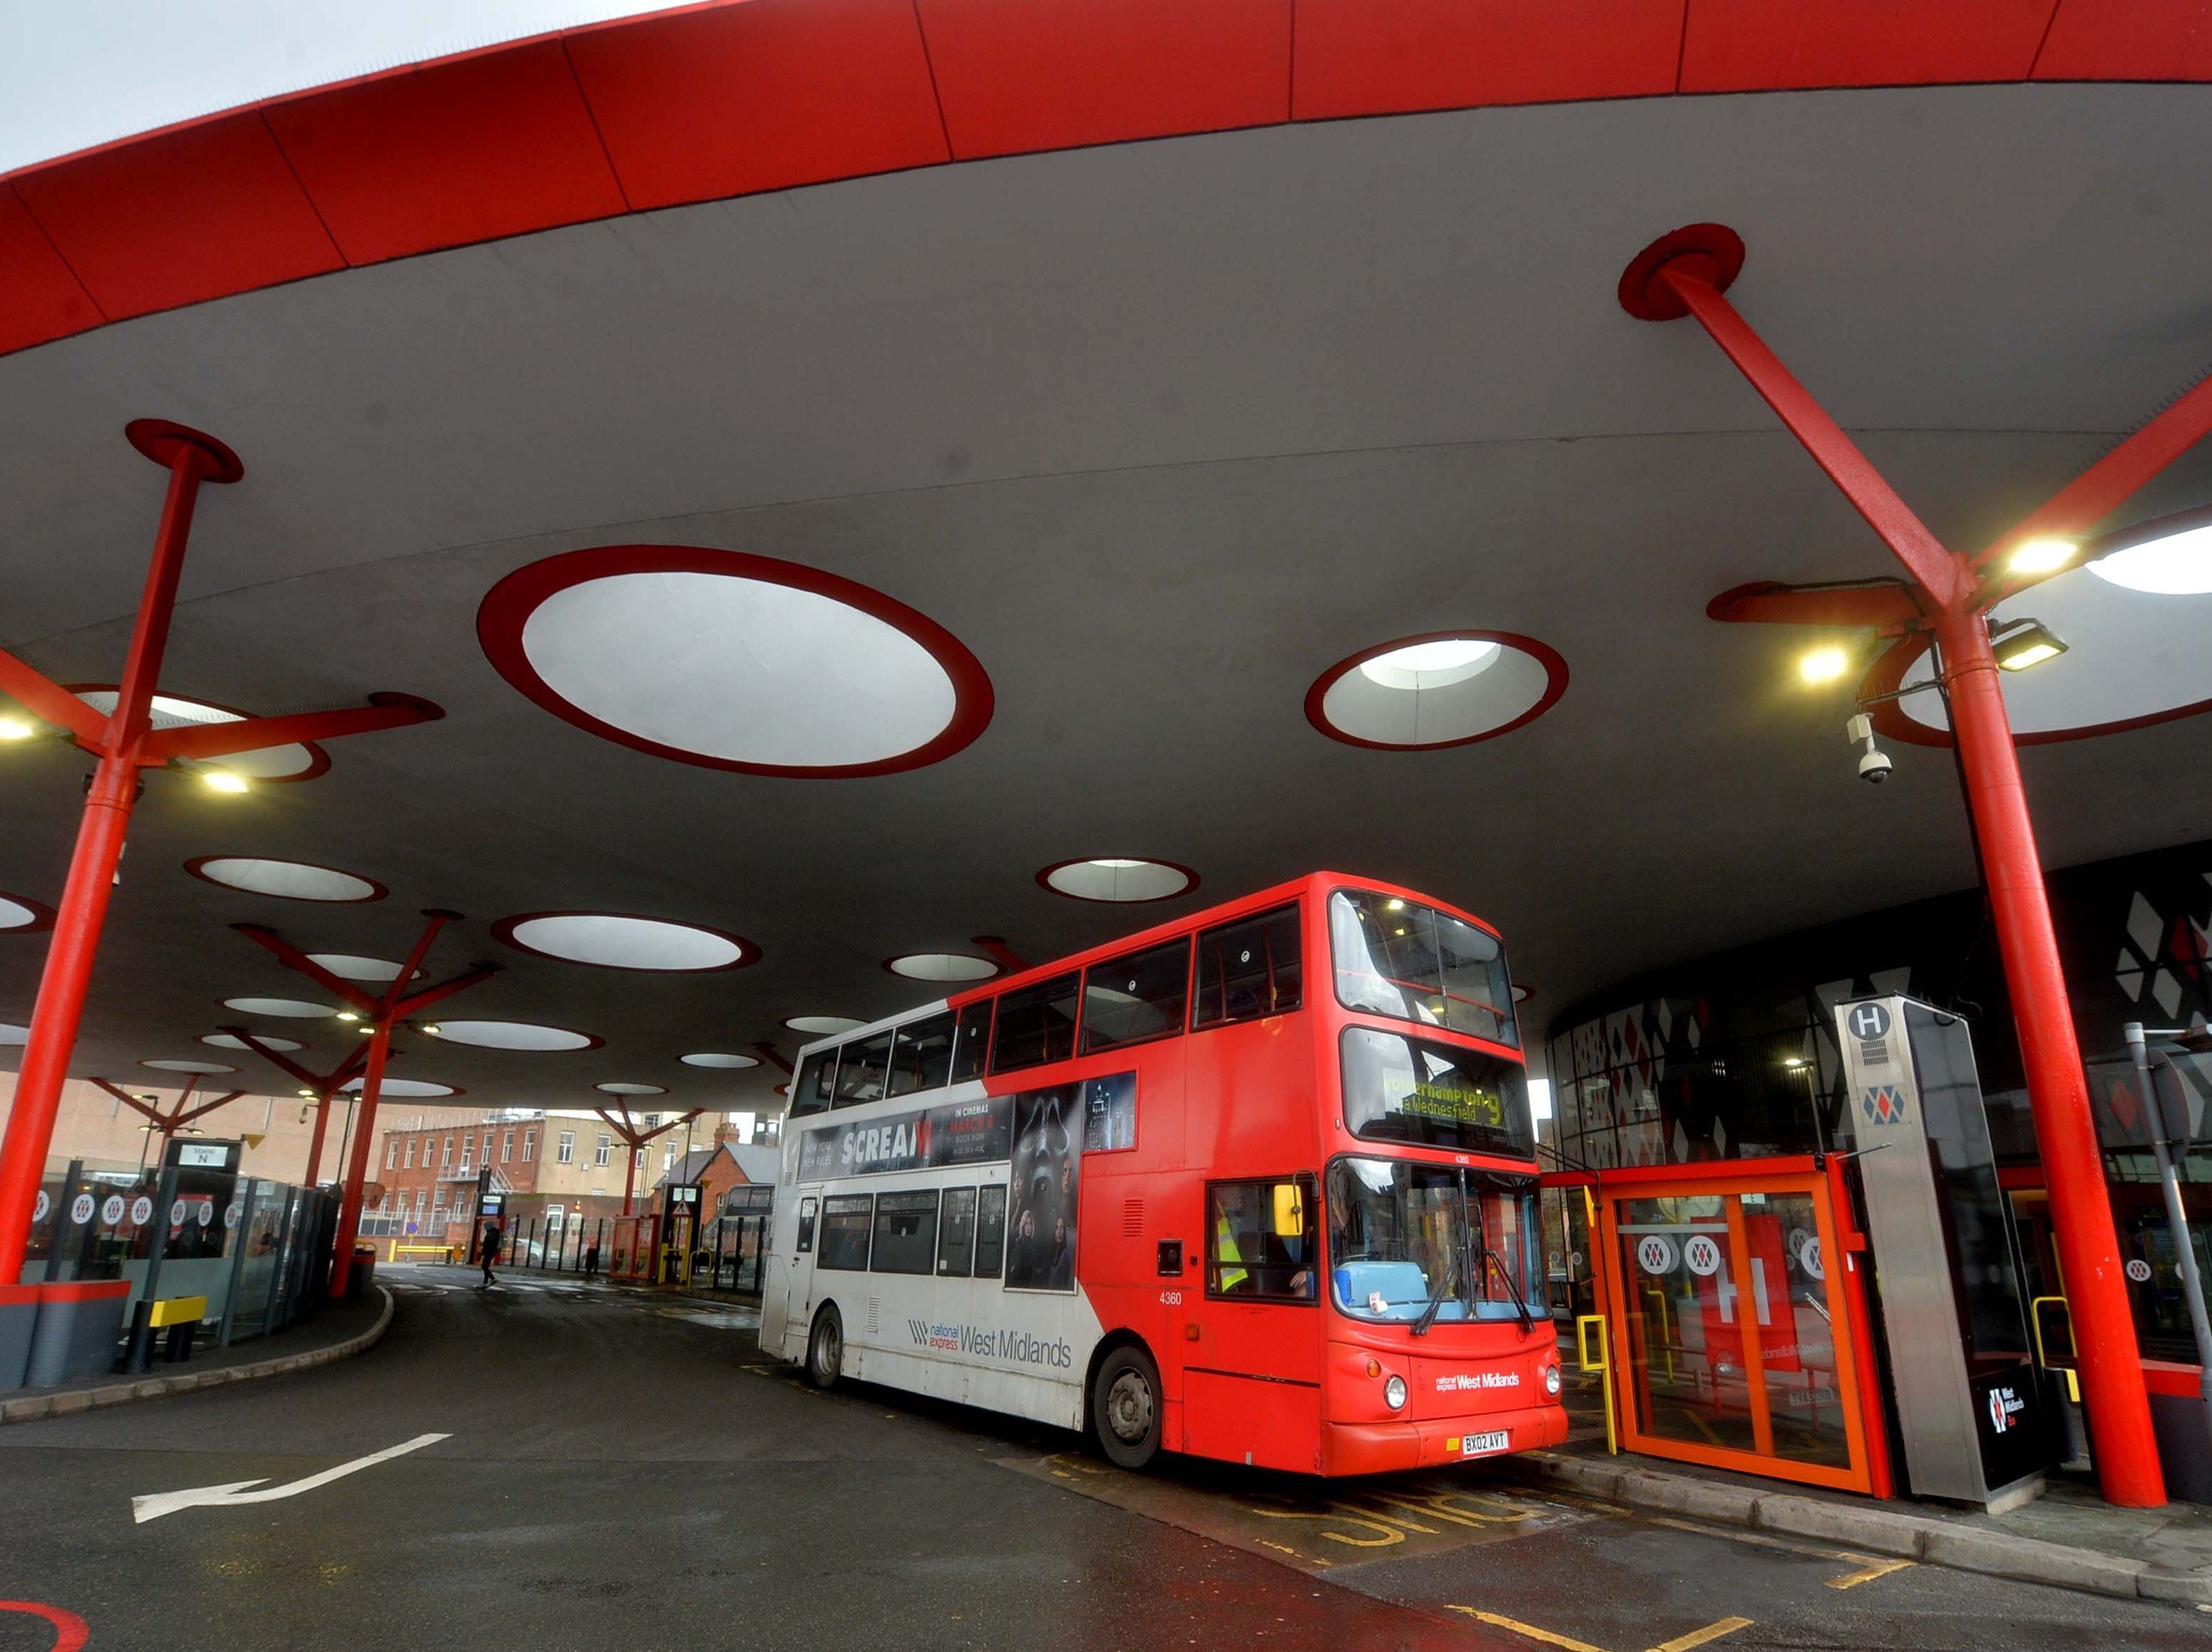 West Midland bus fares increase today - see what the new rates you'll have to pay are